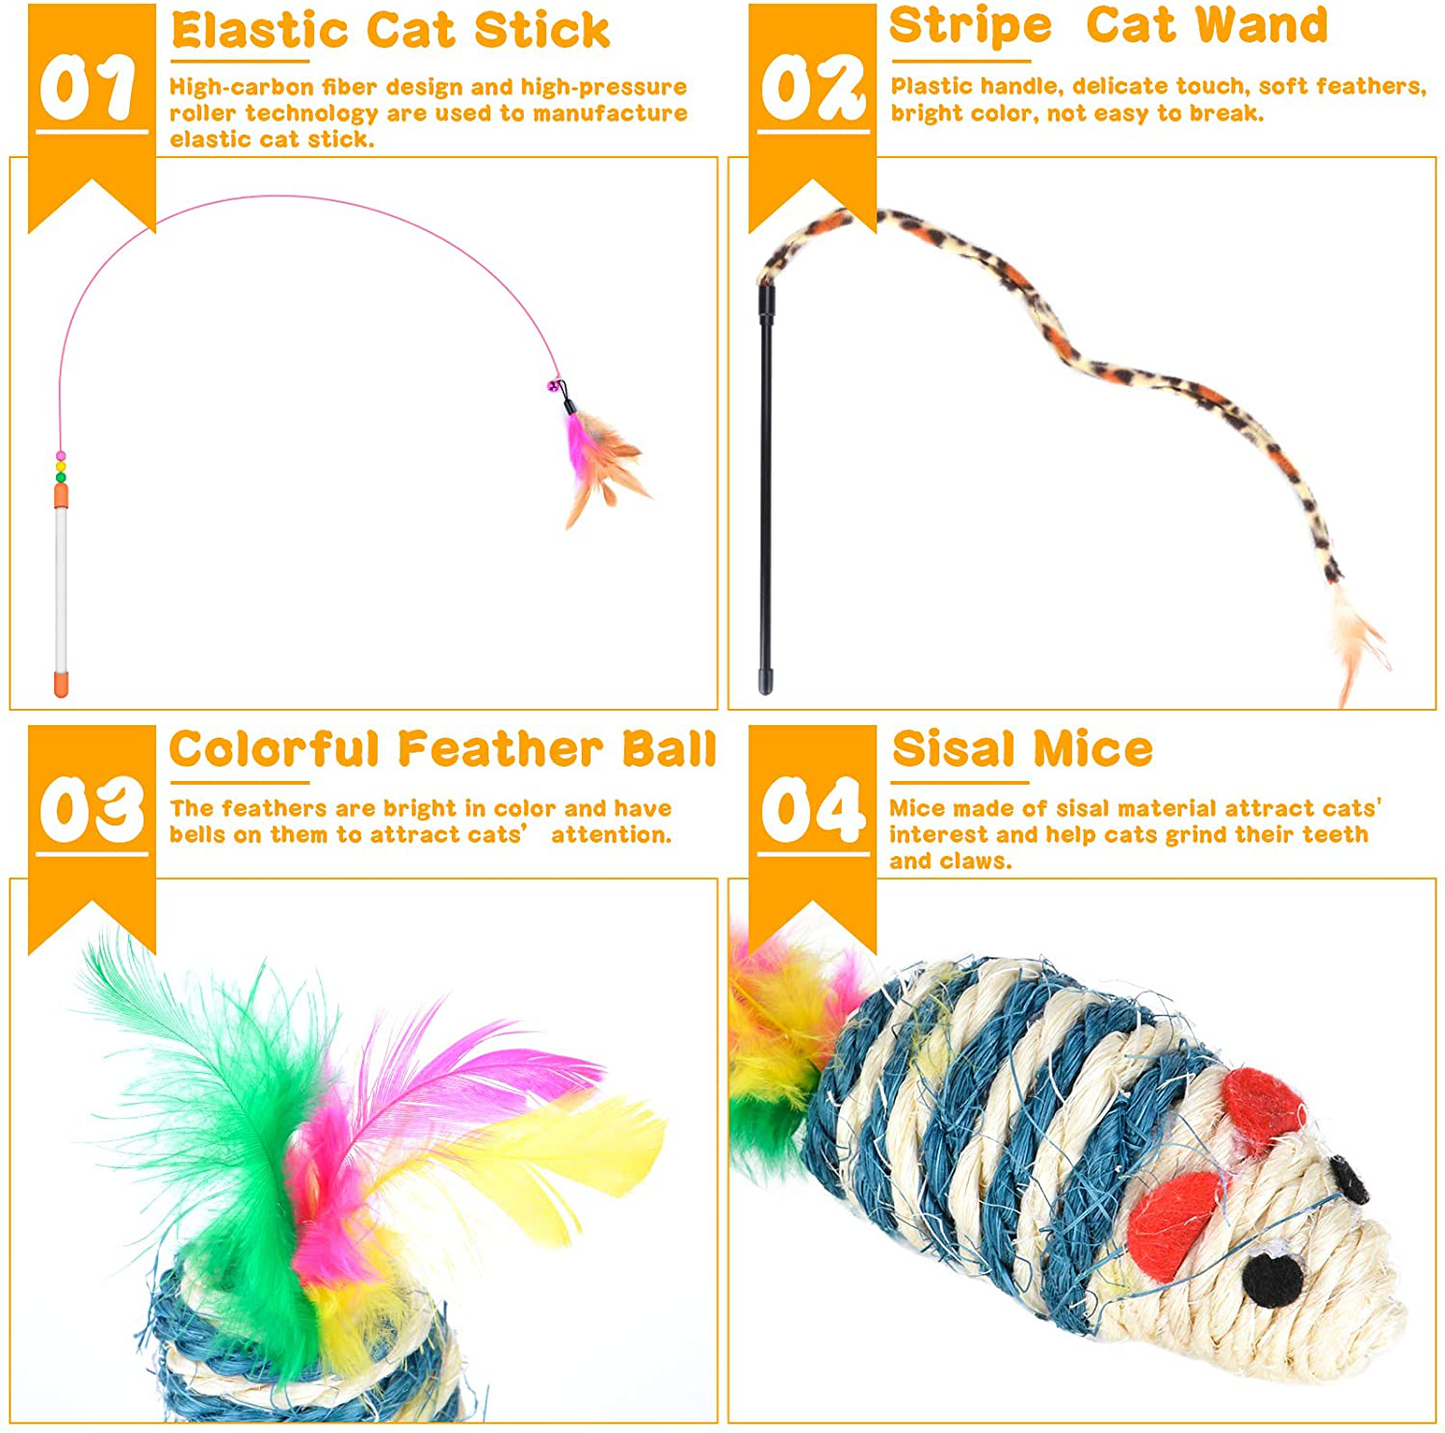 Qoosea 24PCS Cat Toys Set Interactive Kitten Toys for Indoor Cats Catnip Toy Kitten Feather Wand Cat Tunnel, Cat Springs, Mice and Bells Toys, Cat Wand Toy for Cat Kitten Animals & Pet Supplies > Pet Supplies > Cat Supplies > Cat Toys Qoosea   